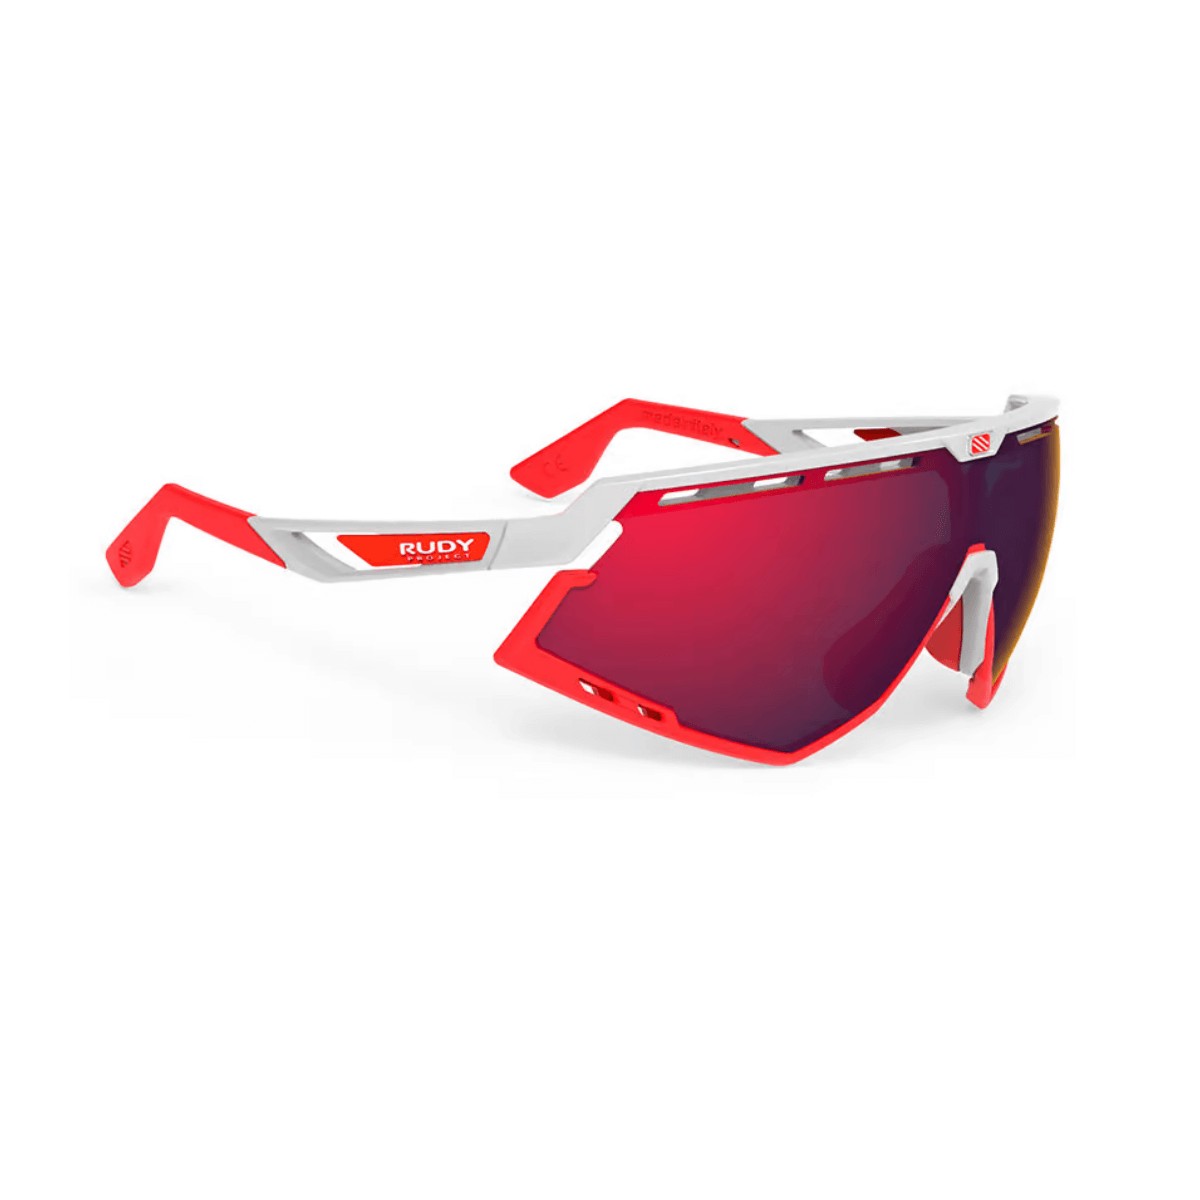 Image of Rudy Project Defender Brille Weiß Glanz Rot Fluo